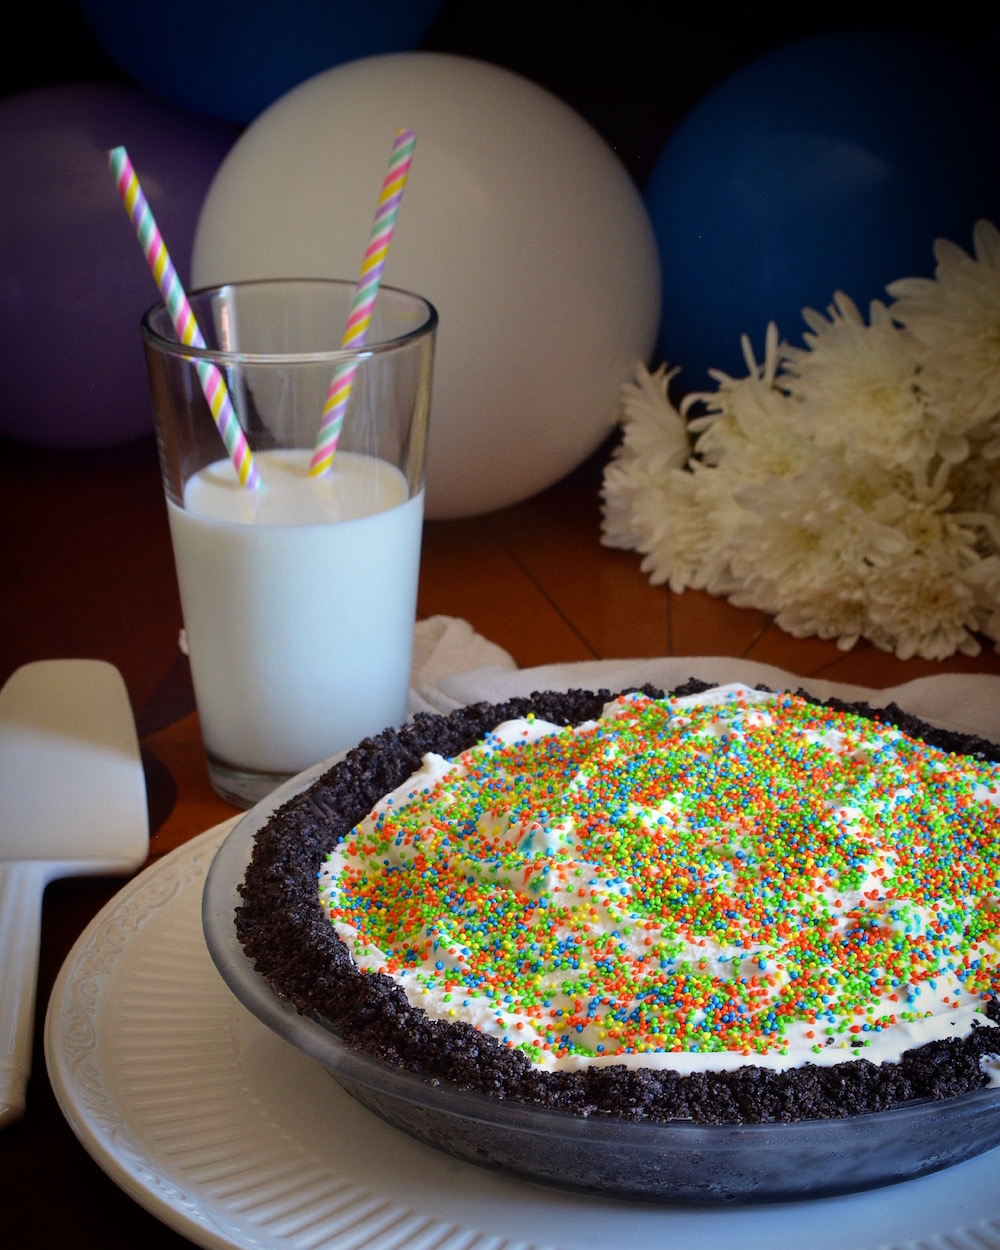 This is an easy, homemade nut-free ice cream pie recipe.